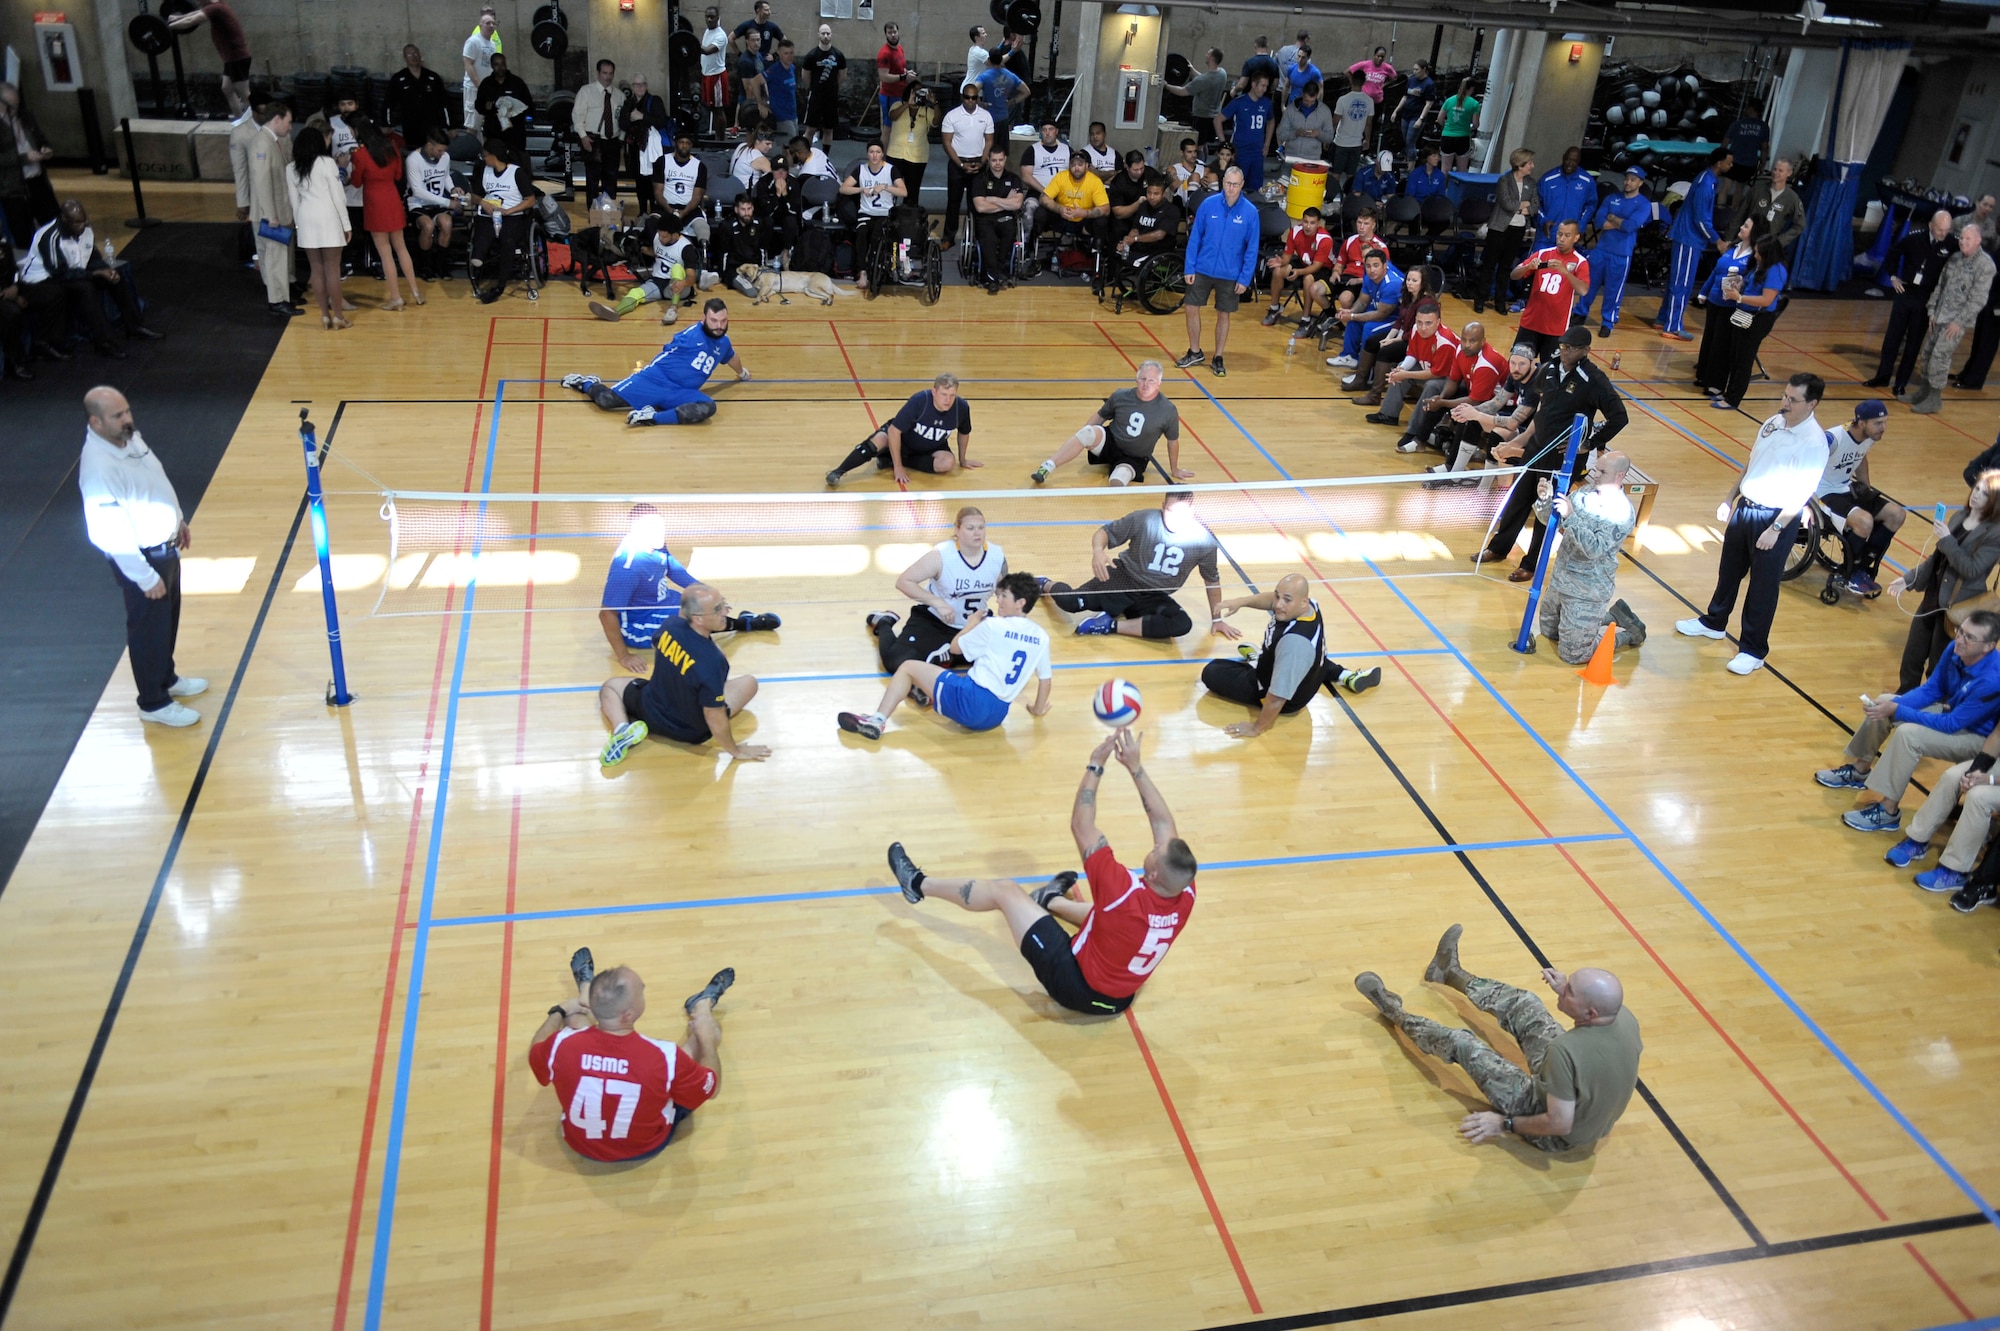 Wounded warrior athletes from the Army, Air Force, Navy and Marines compete against senior military leaders in the joint-service Warrior CARE Month Sitting Volleyball Tournament at the Pentagon Nov. 17, 2016. The warrior CARE event offers participants caregiver support and recovering Airmen mentorship, training and adaptive and rehabilitative sports training. CARE stands for Caregiver Support Program, Adaptive and Rehabilitative Sports Program, Recovering Airmen Mentorship Program, and Employment and Career Readiness Program. (U.S. Air Force photo/Tech. Sgt. Robert Barnett)